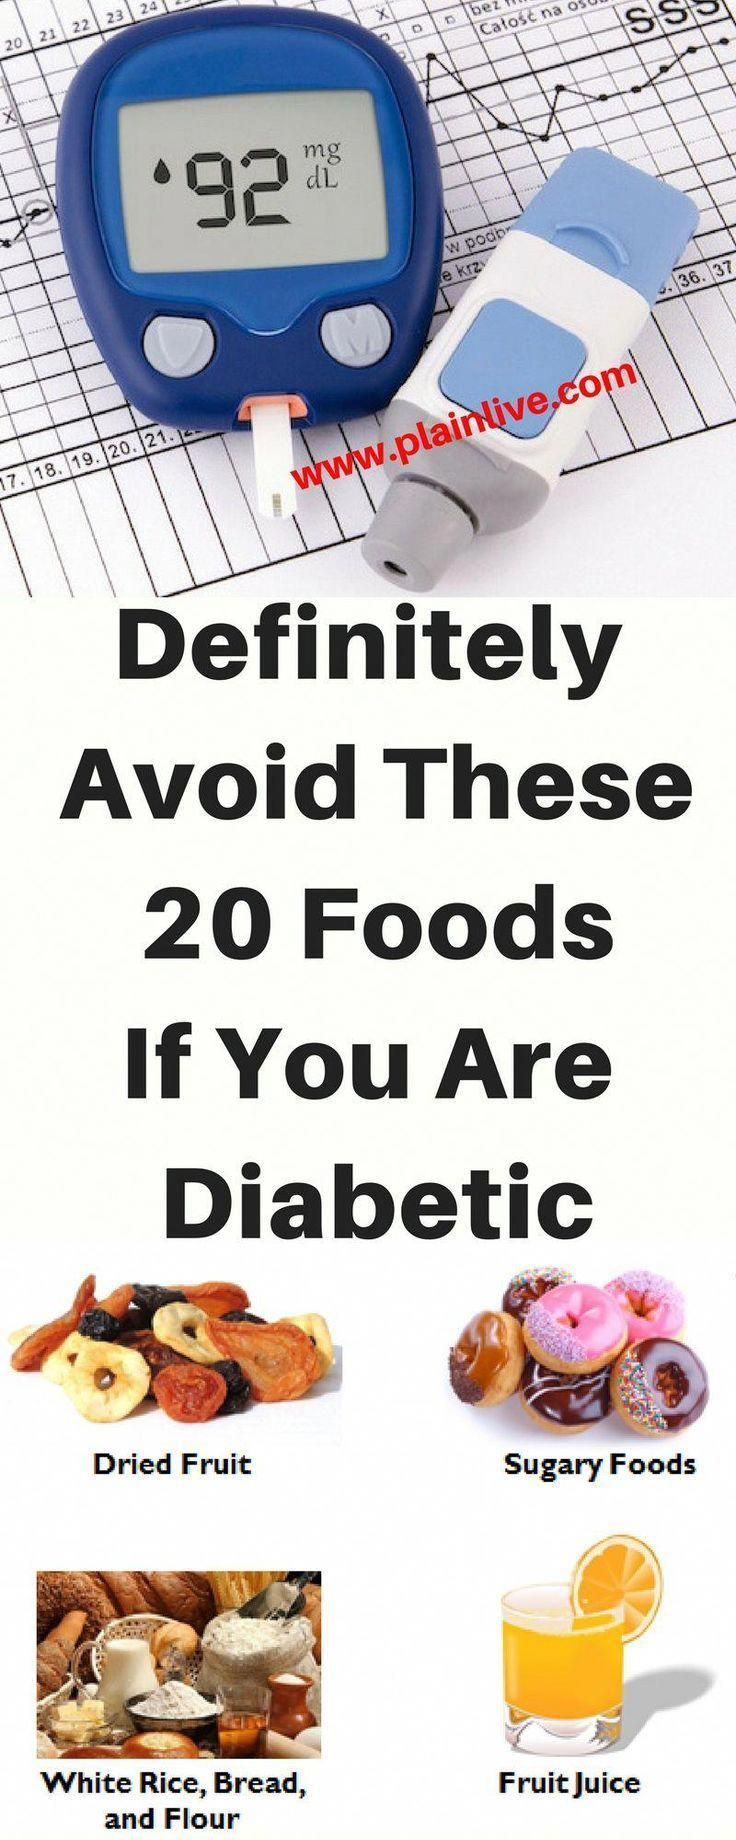 Definitely Avoid These 20 Foods If You Are Diabetic 